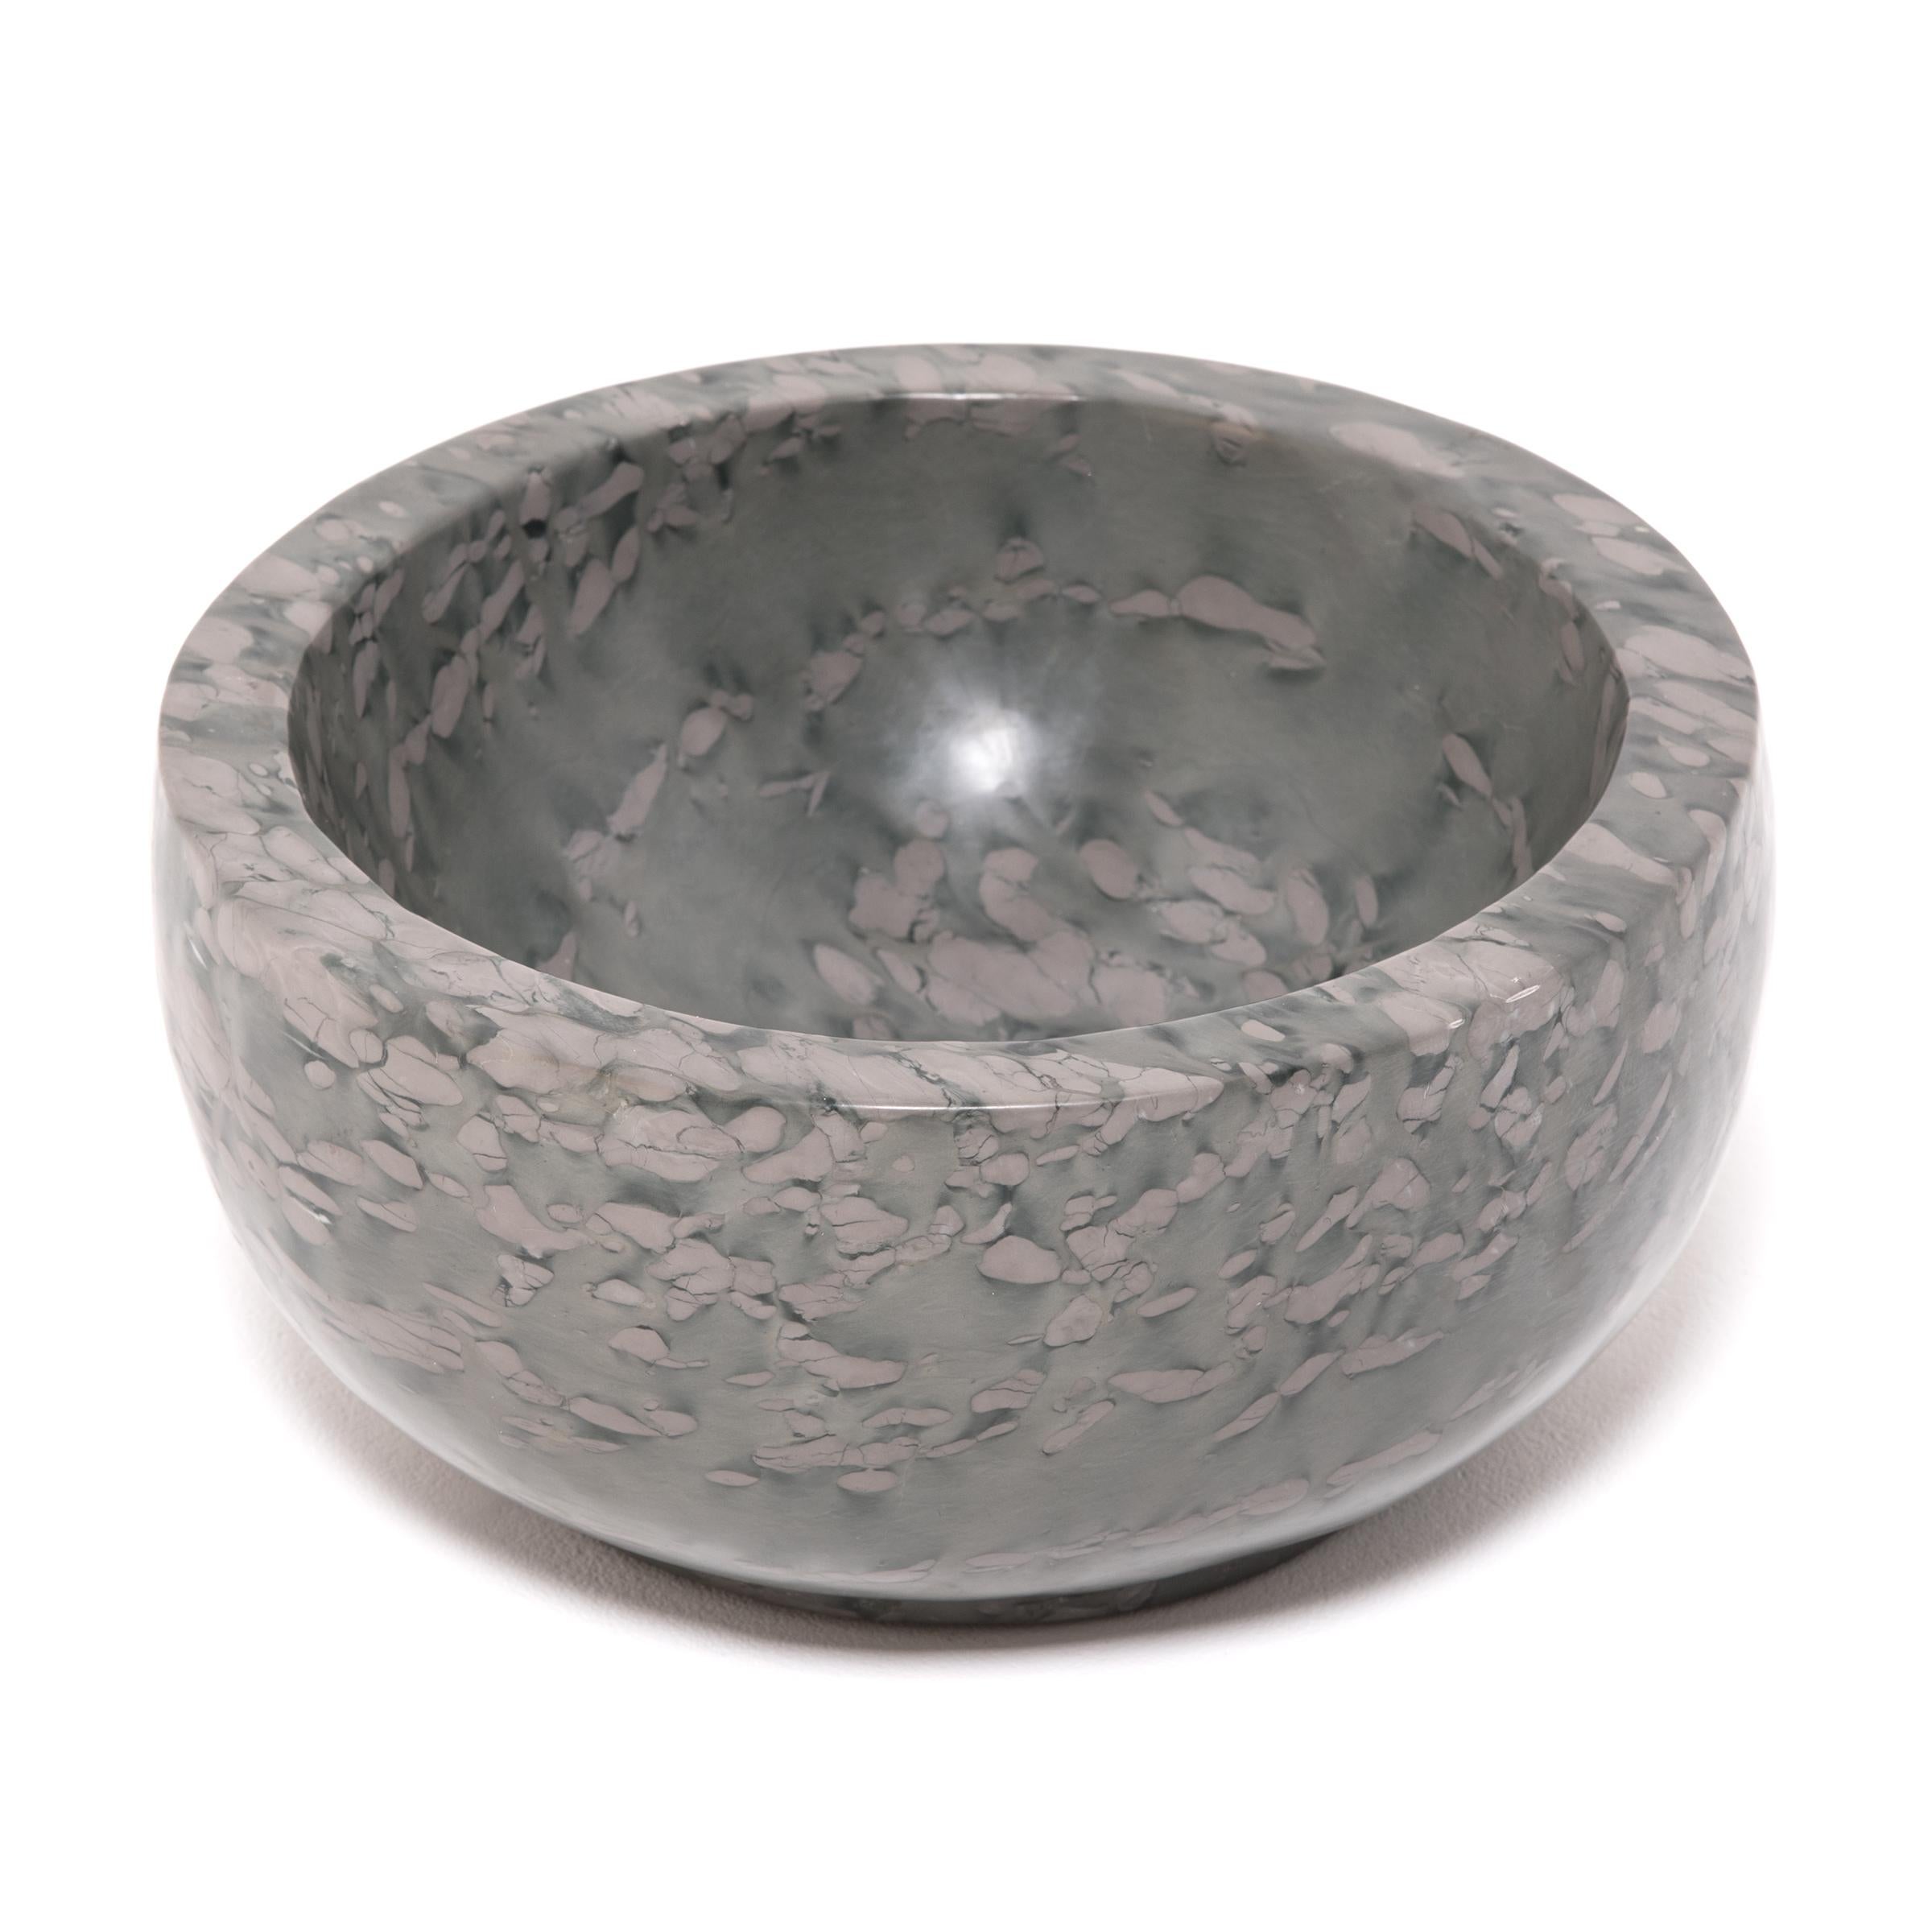 A clean-lined interpretation of an ancient form, this footed basin was hand-carved of zhenzhu stone by artisans in China's Shandong province. It looks as if it were meticulously painted but the mesmerizing pattern of the zhenzhu is actually inherent